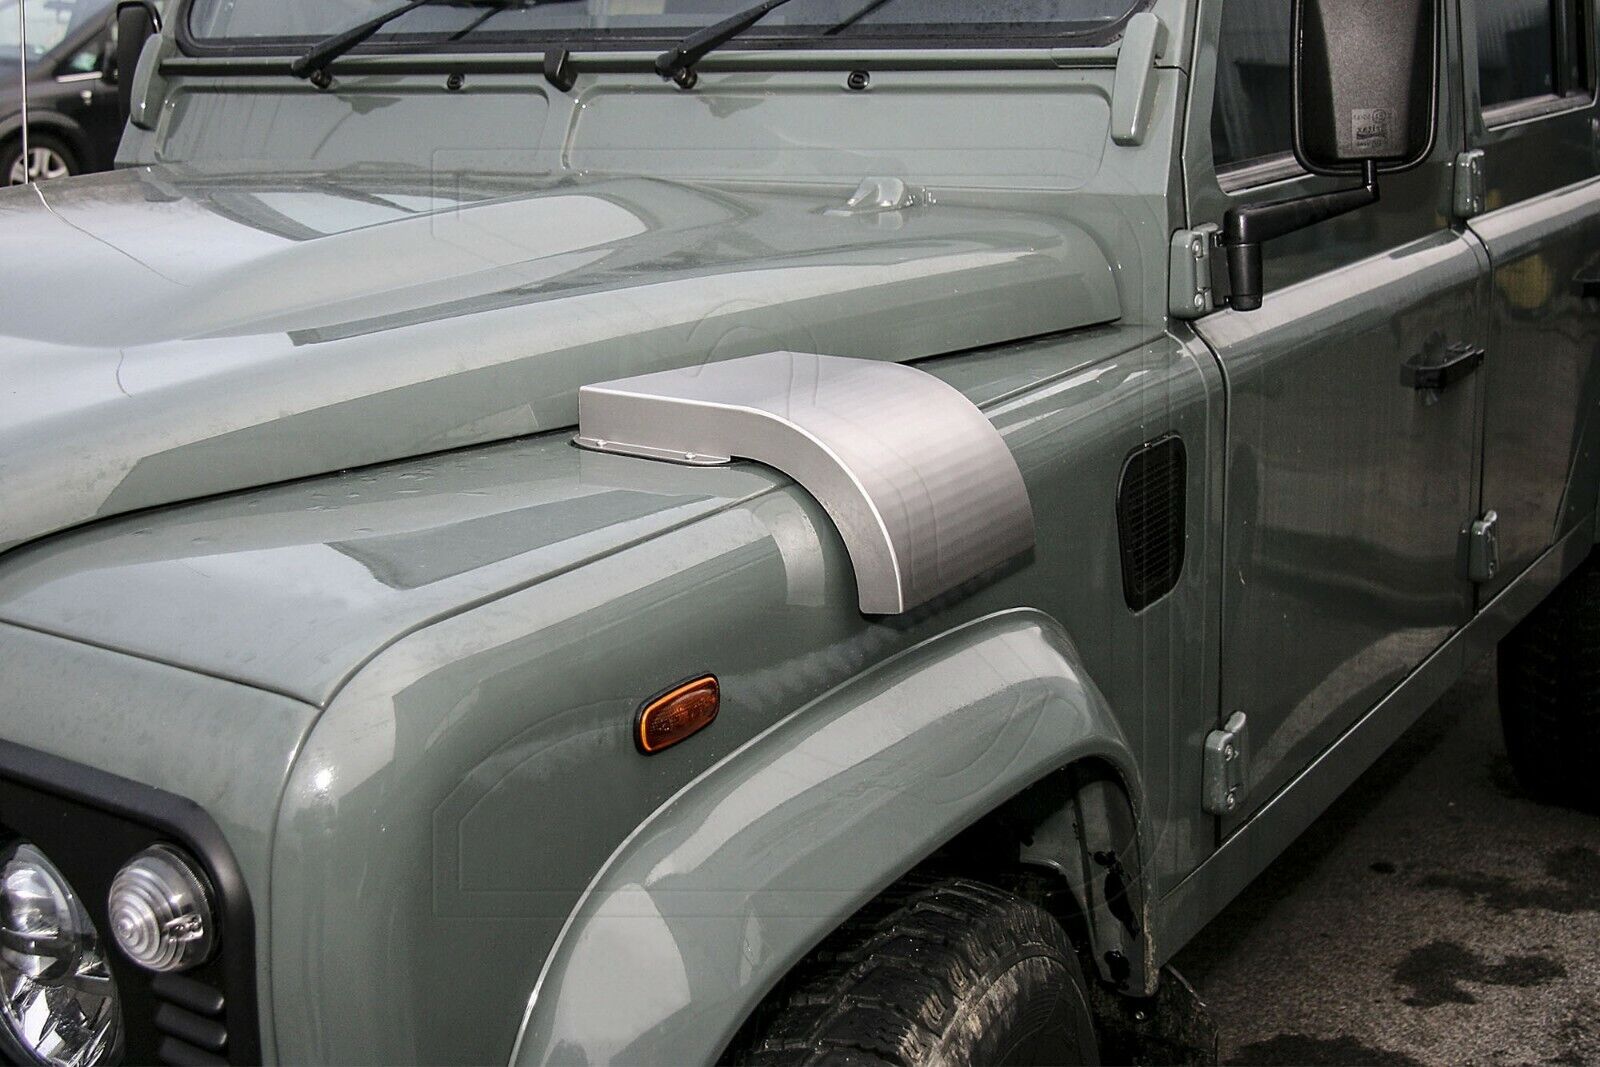 Defender Military Snow Cowl Cover - for Land Rover Defender 90/110/130 (stainless steel)